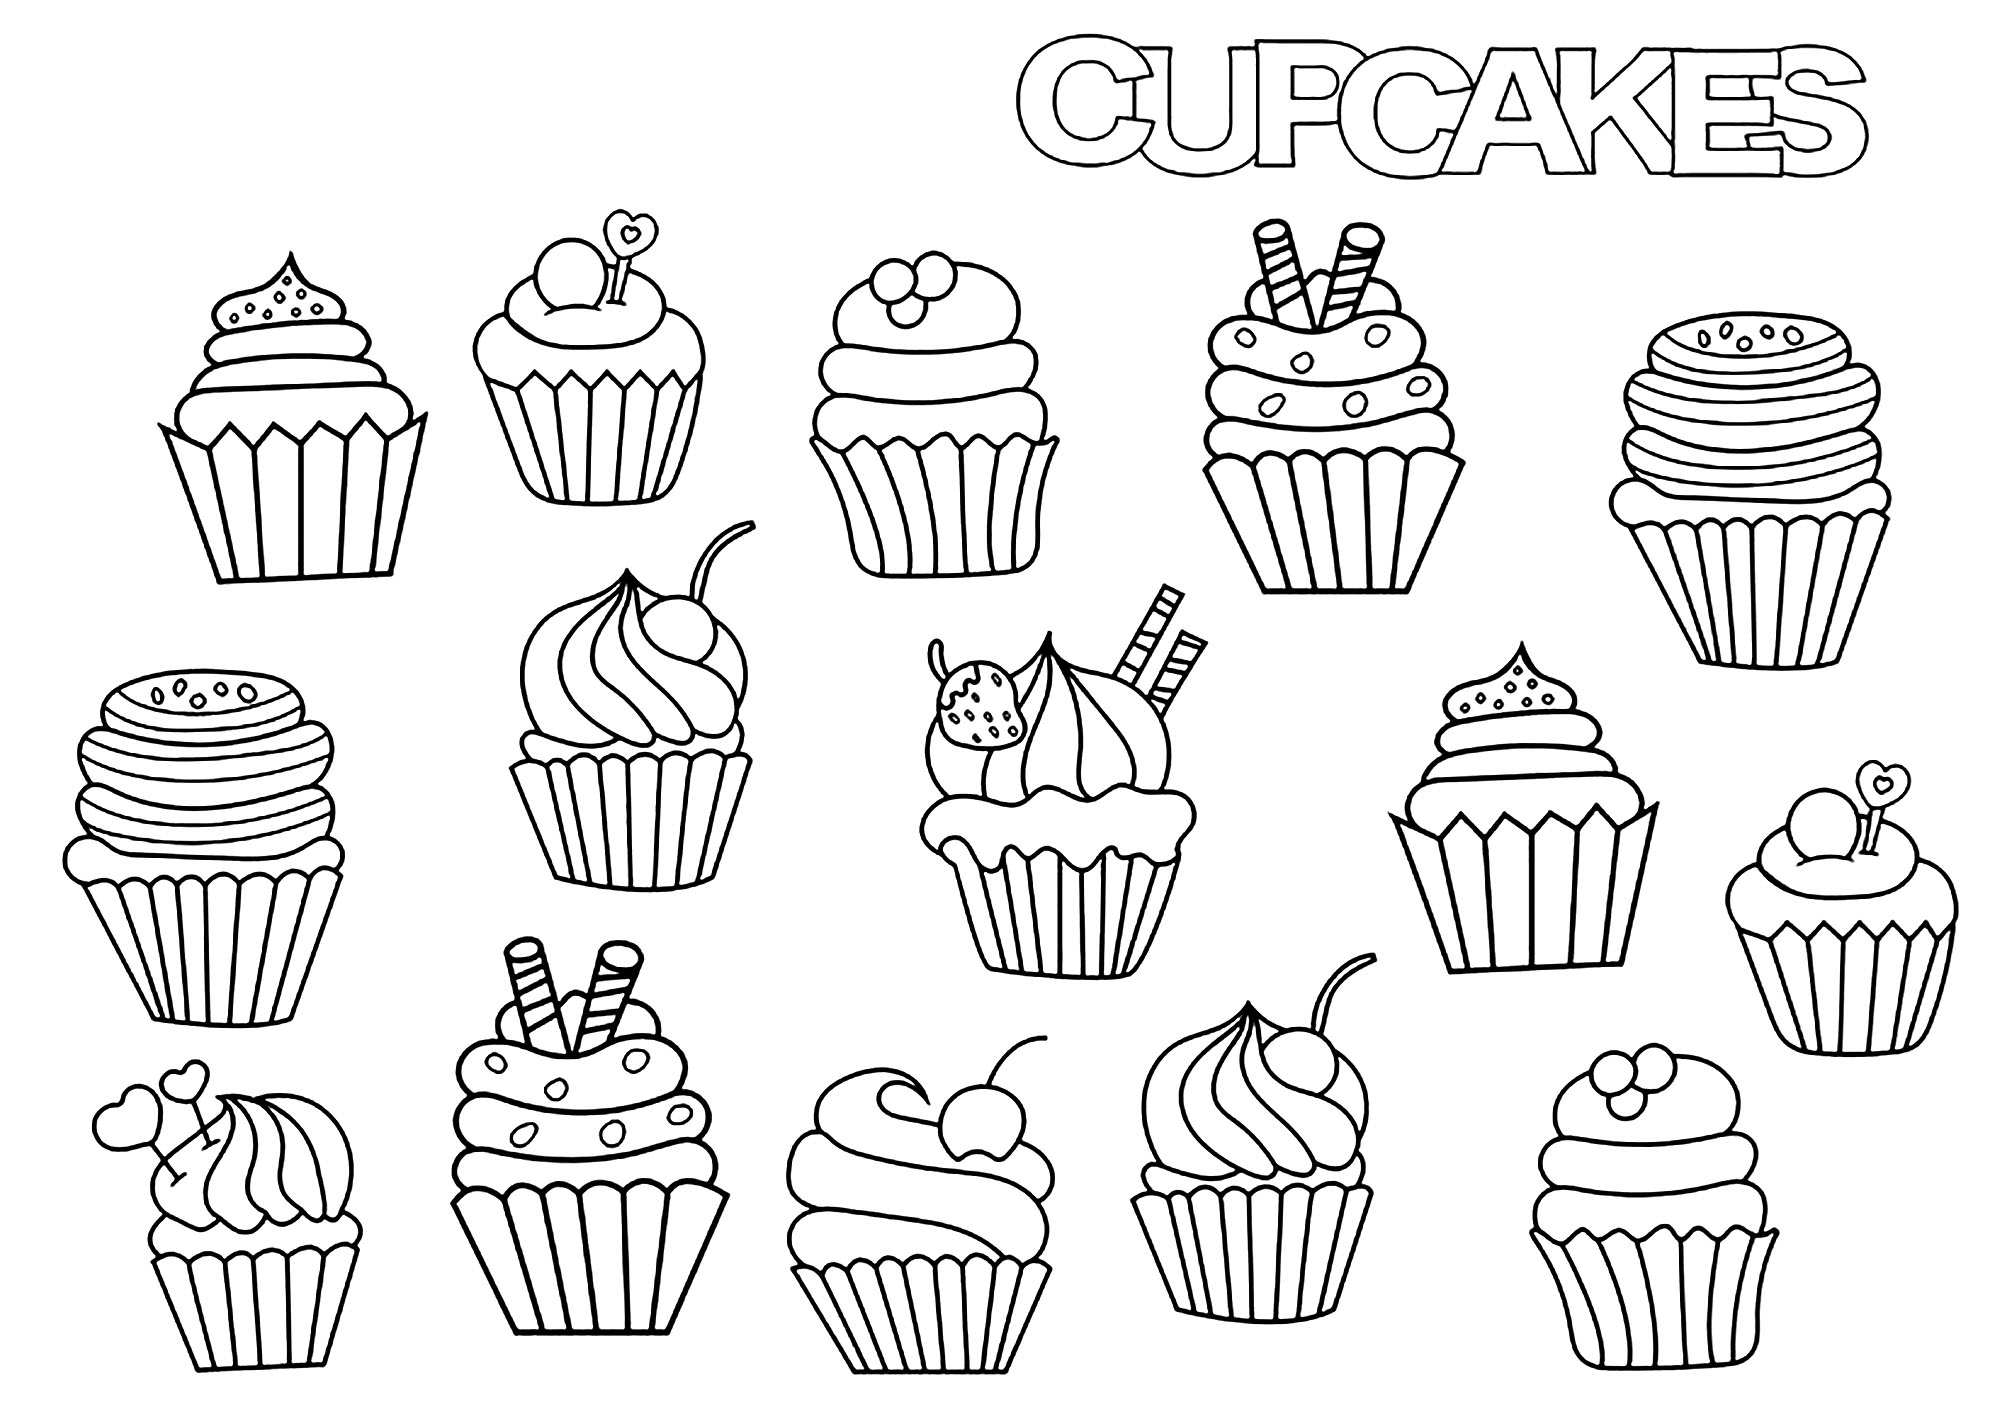 Cupcakes Doodle - Cupcakes Adult Coloring Pages